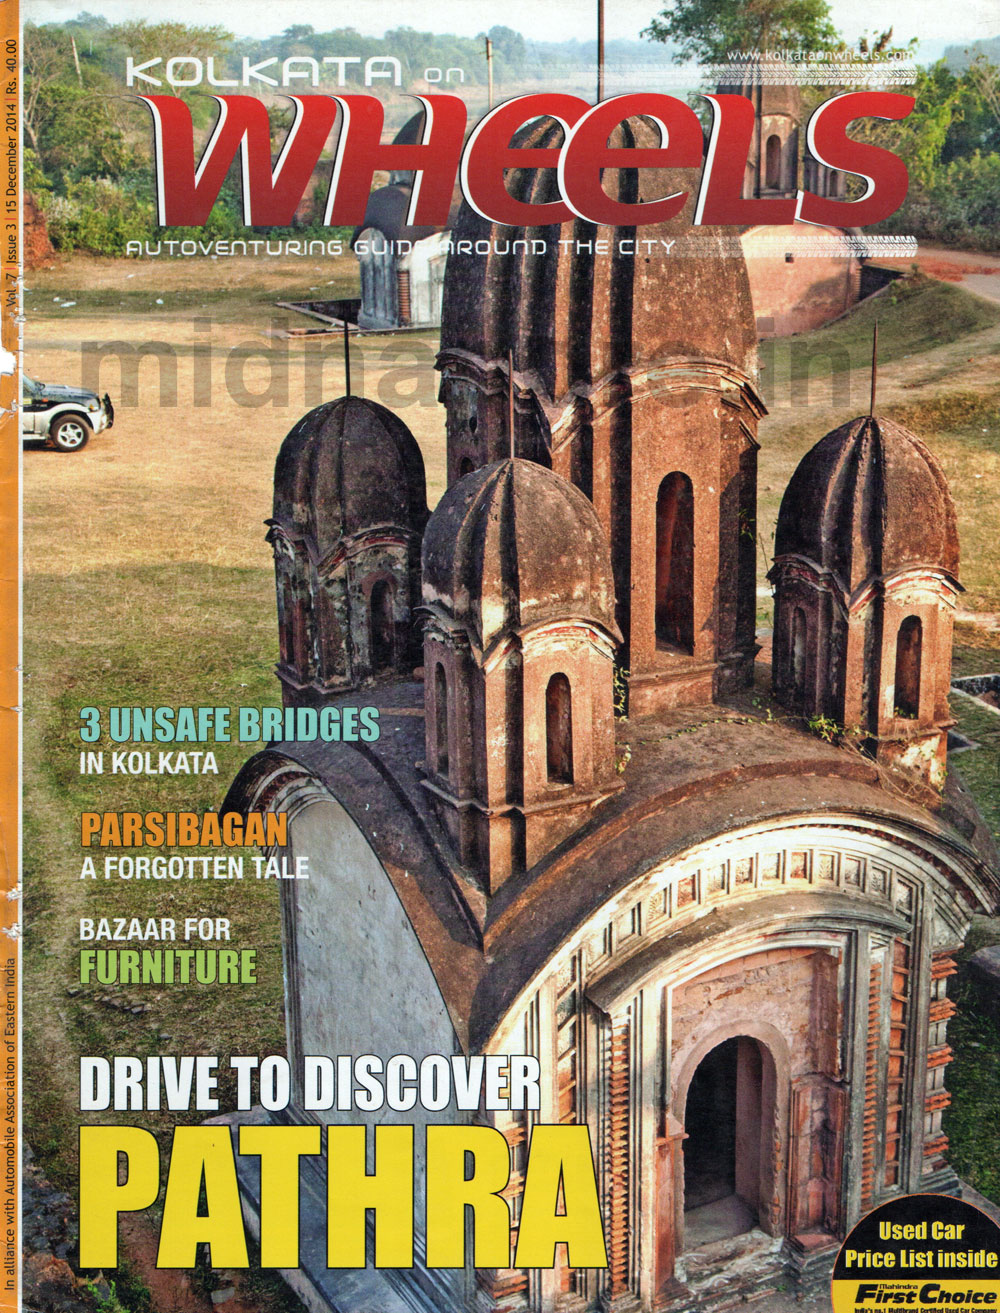 Drive to discover Pathra, published in Kolkata on Wheels